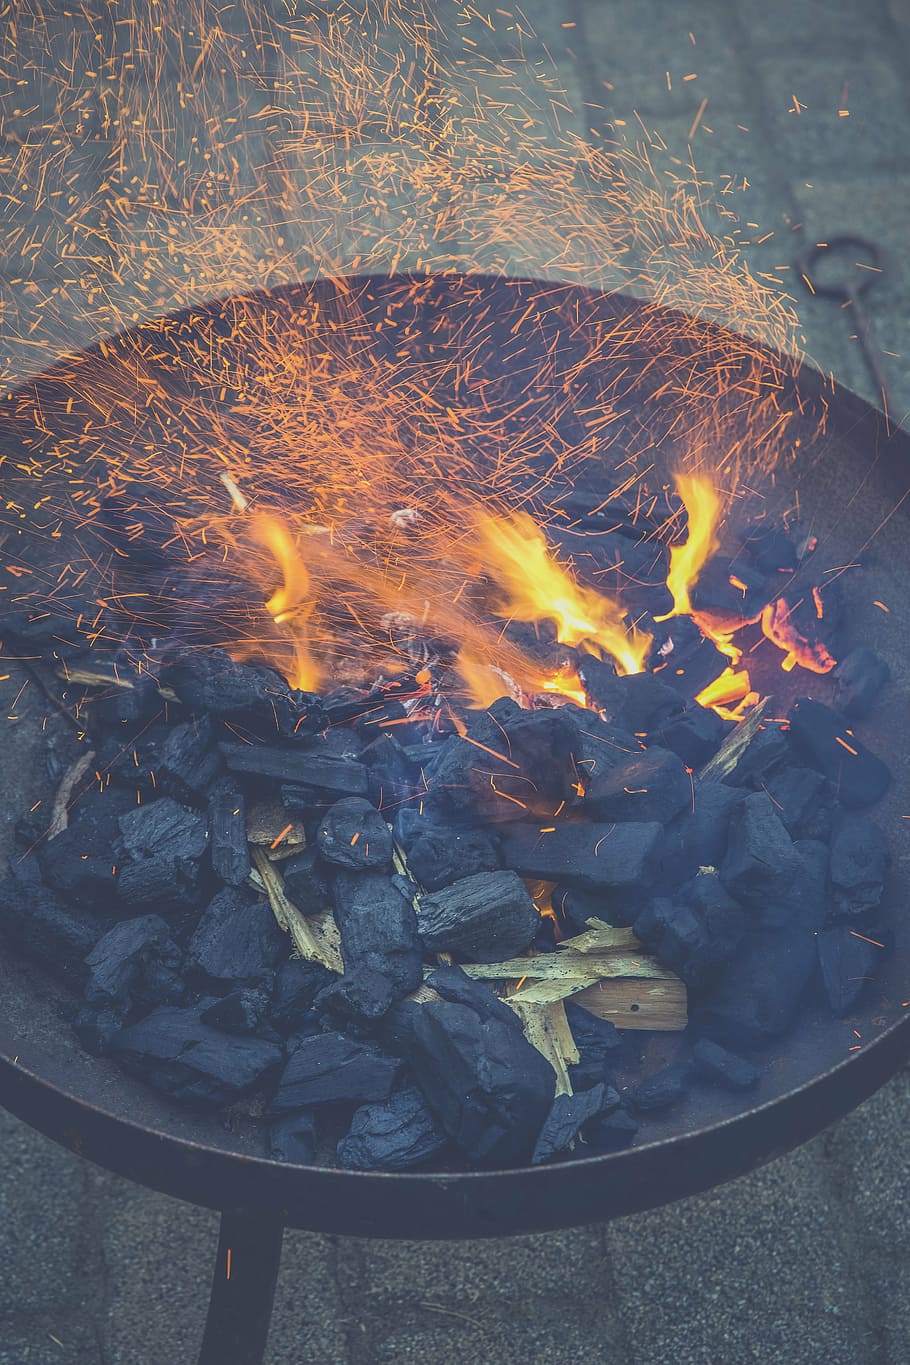 coals, fire pit, burning, charcoal, still, items, things, grill, flames, fire